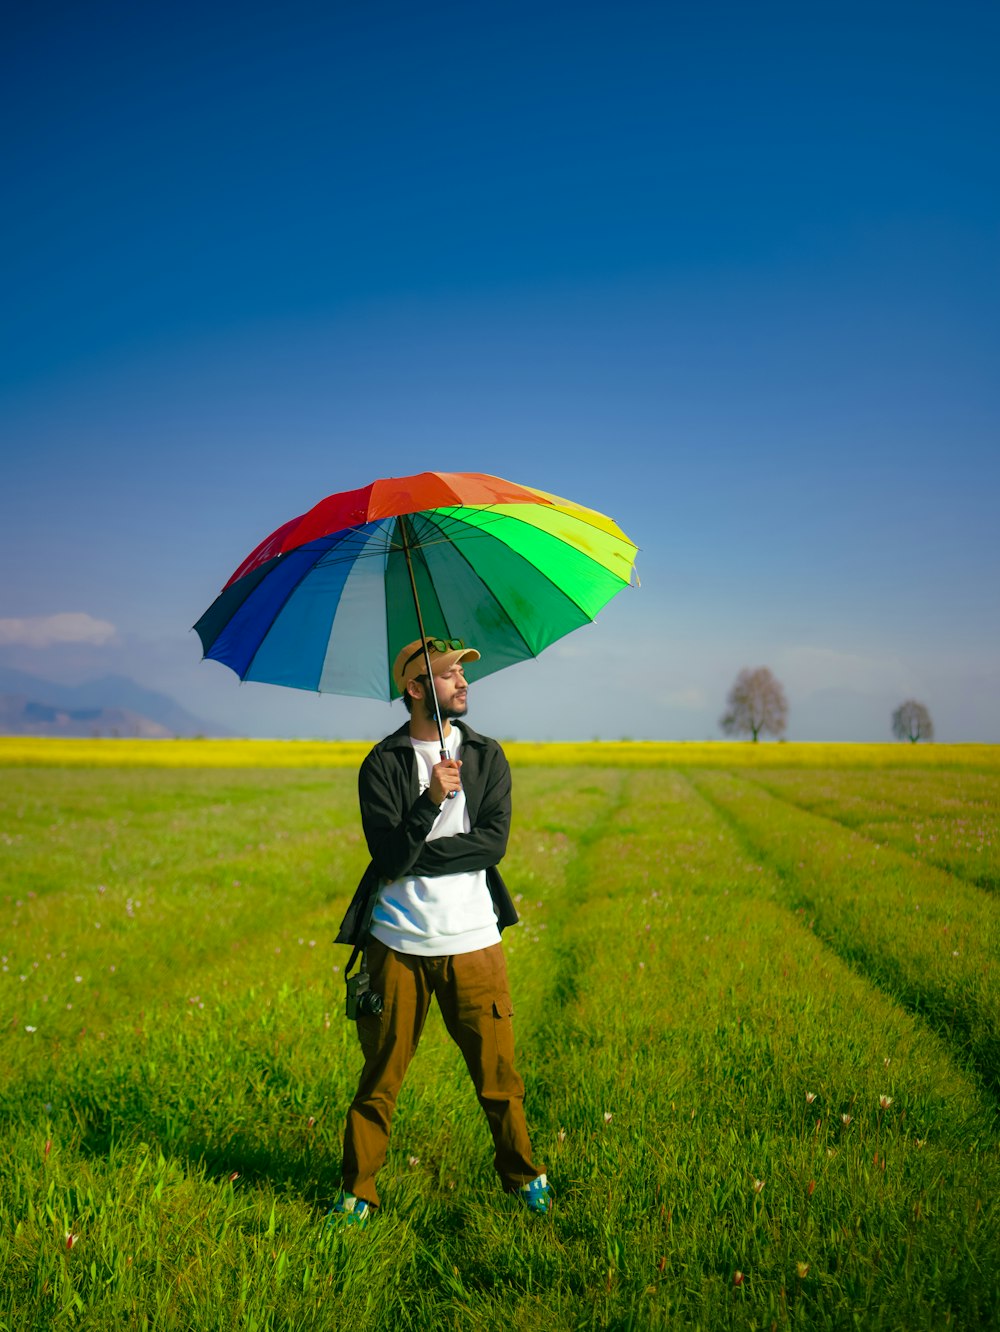 a person standing in a field holding an umbrella